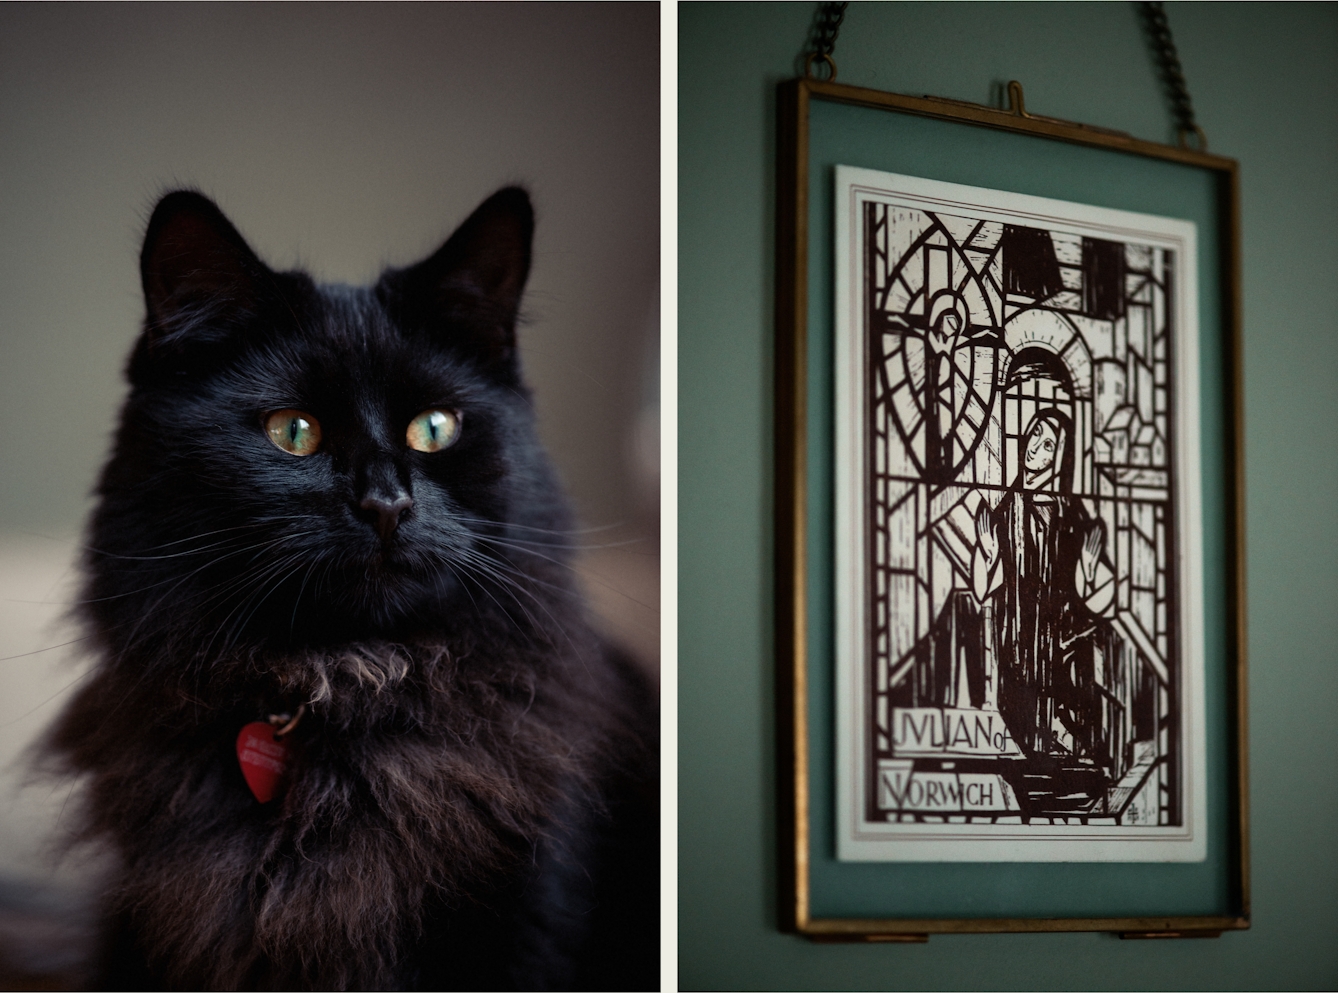 Photographic colour diptych. The image on the left shows a black cat with green eyes. The cat is wearing a collar with a red tag. The photo on the right shows a black and white painting in a thin gold frame, hanging on a green painted wall. The painting shows a woman in medieval religious clothing, in a church setting. She is looking towards a crucifix with Jesus on it. Text alongside the bottom of the painting reads 'Julian of Norwich'. 